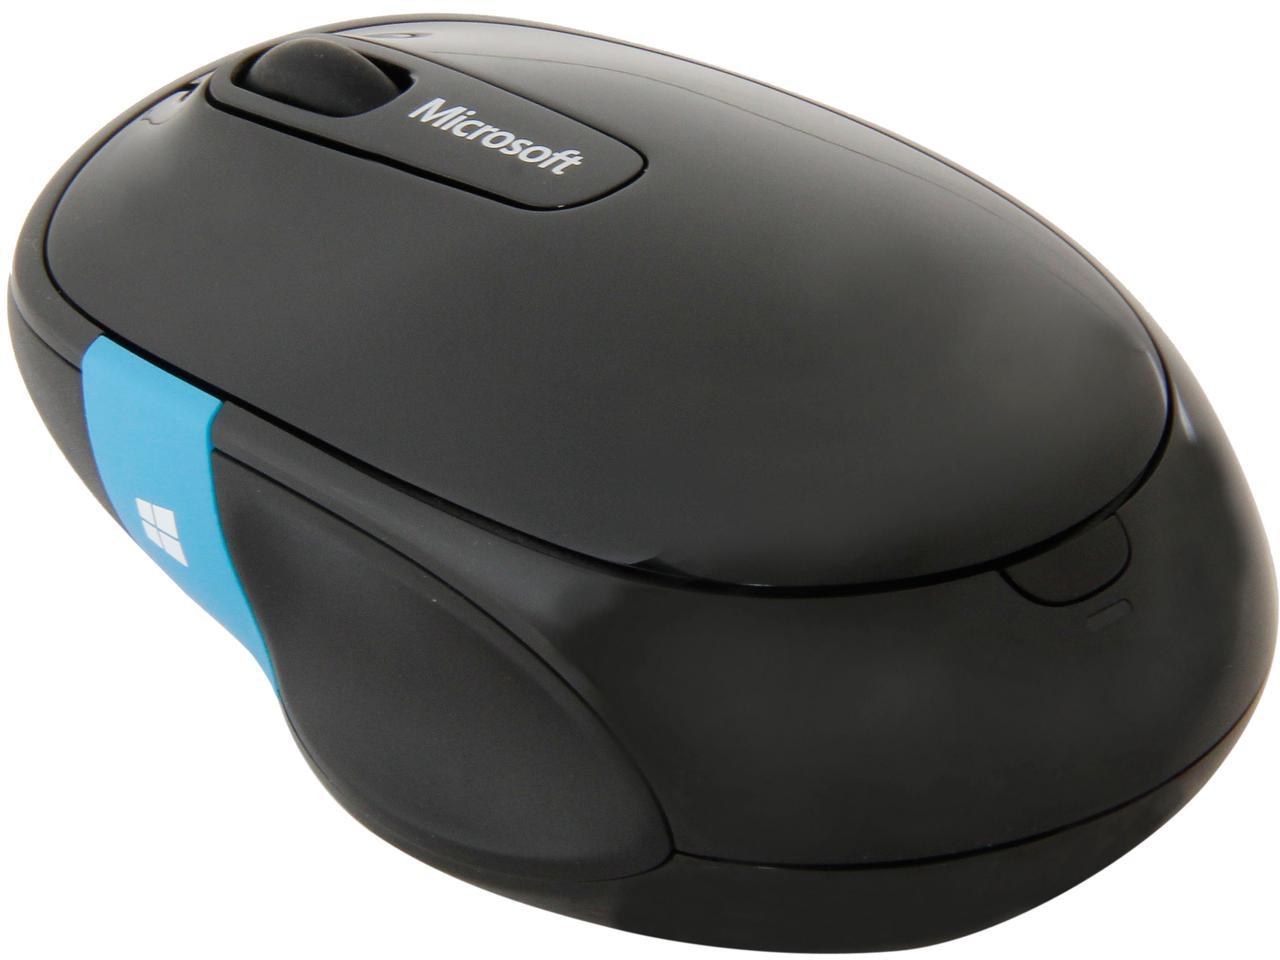 Joint selection camp Will Microsoft Sculpt Comfort Mouse - Black. Comfortable design, Customizable  Windows Touch Tab, 4-Way Scrolling,Bluetooth Mouse for PC/Laptop/Desktop,  works with Mac/Windows Computers - Newegg.com